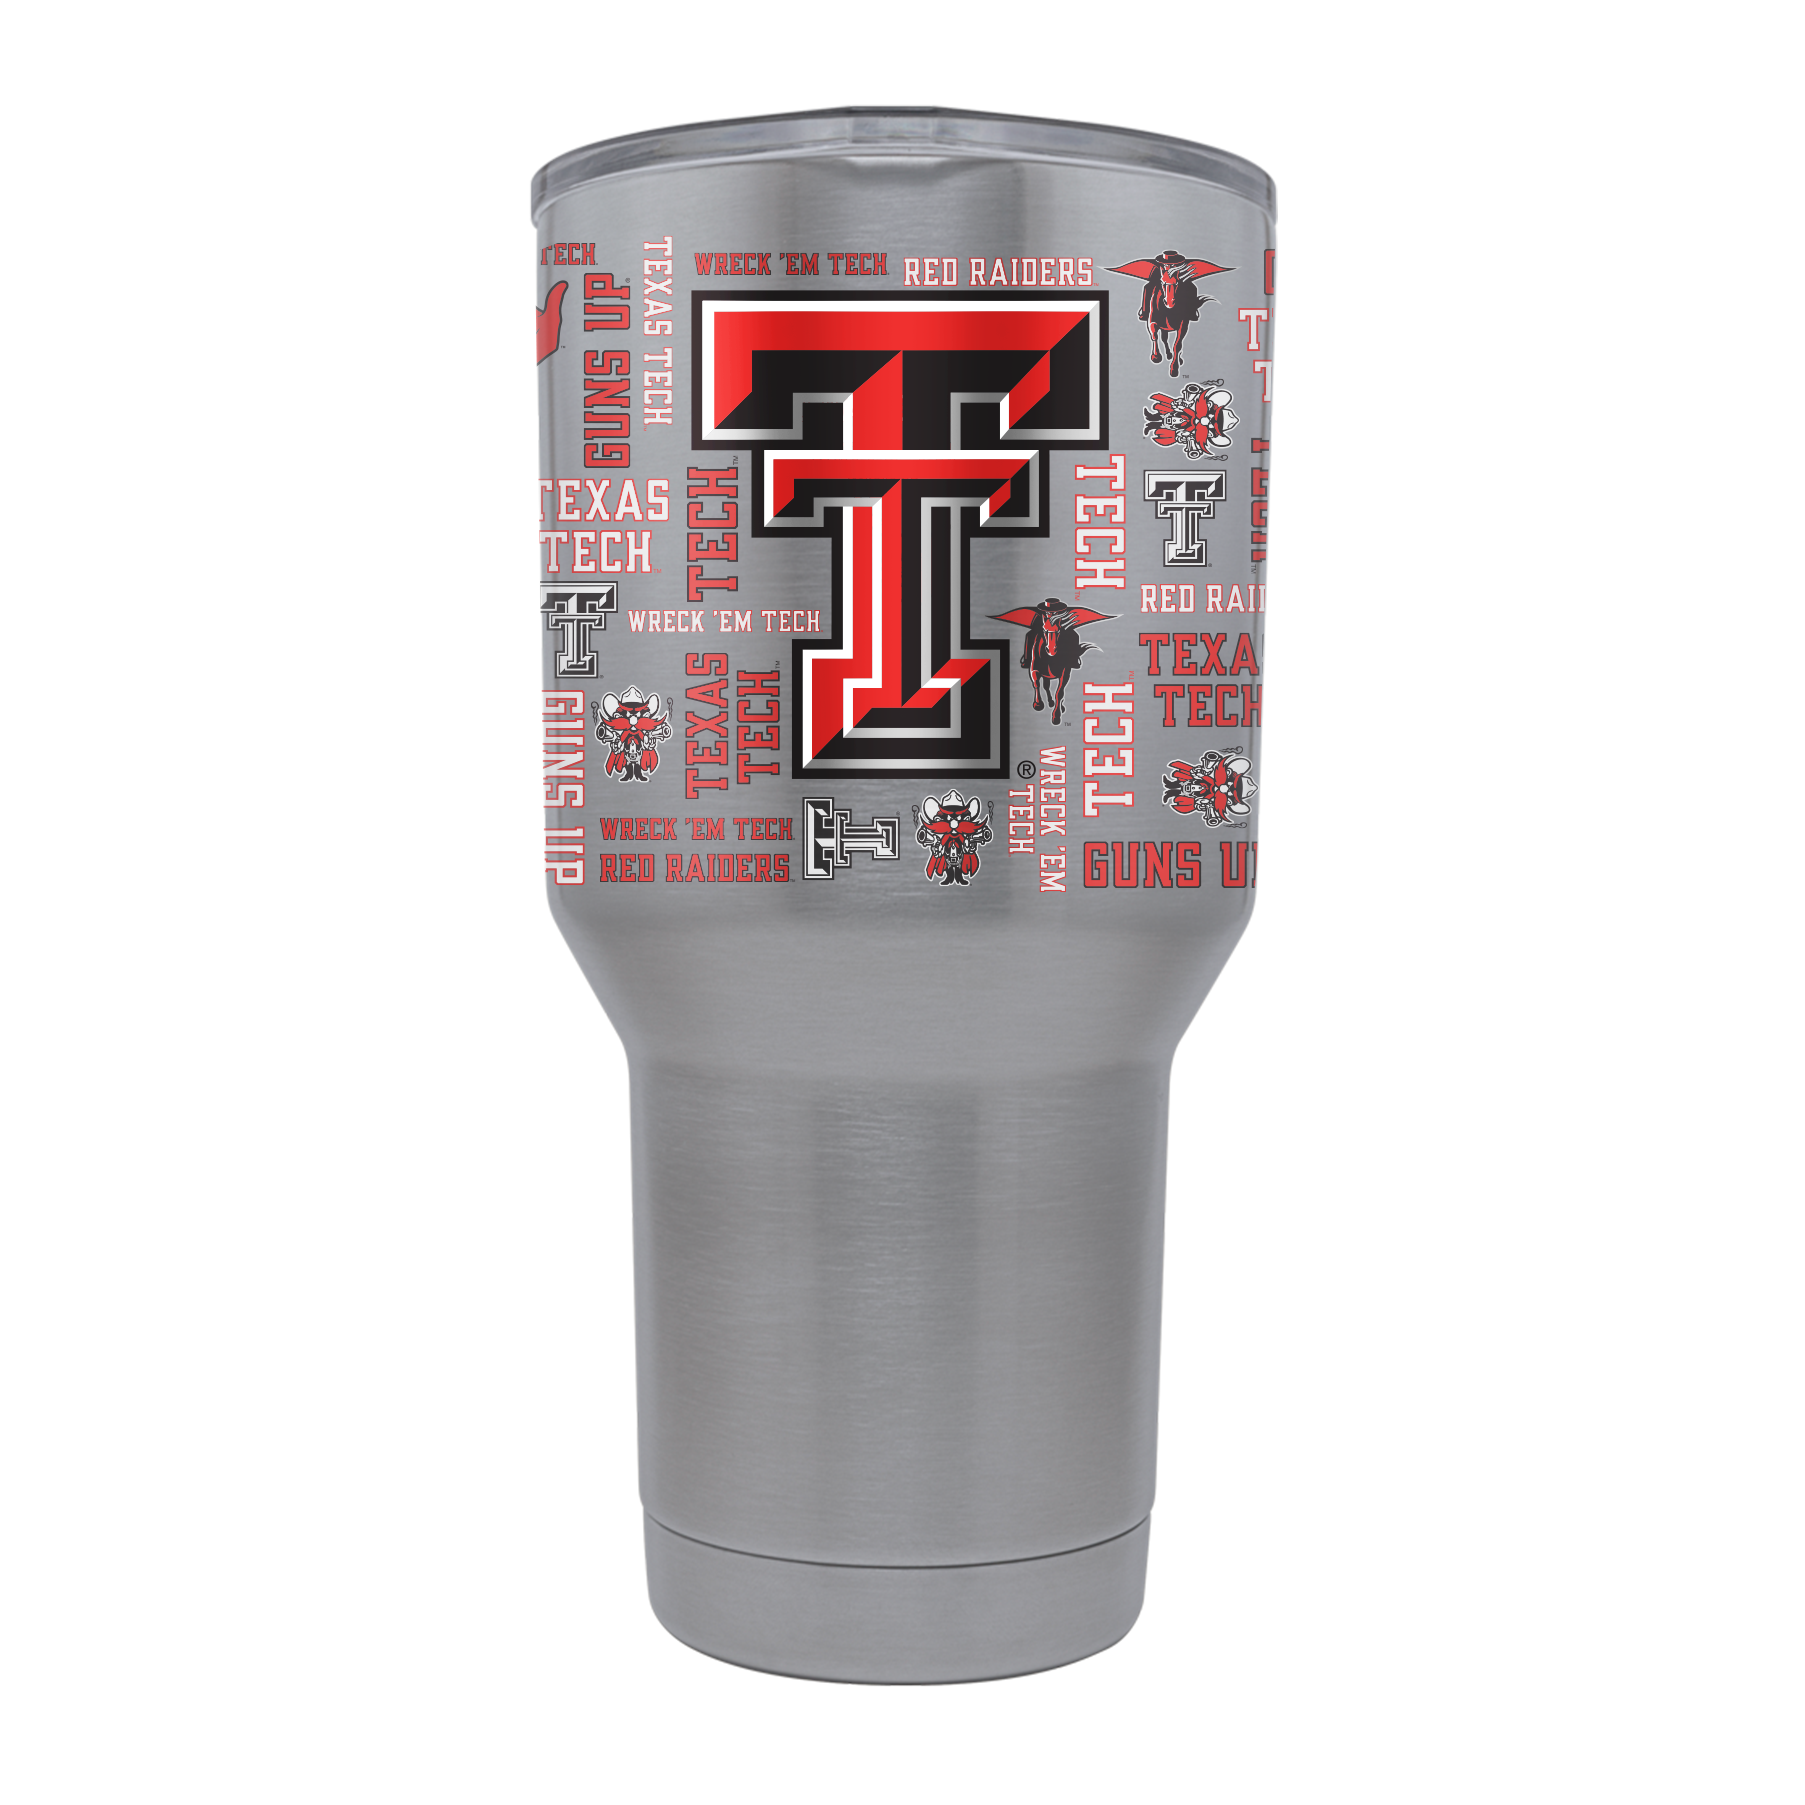 Texas Tech 30oz Red Raiders Stainless Steel Tumbler - All Over